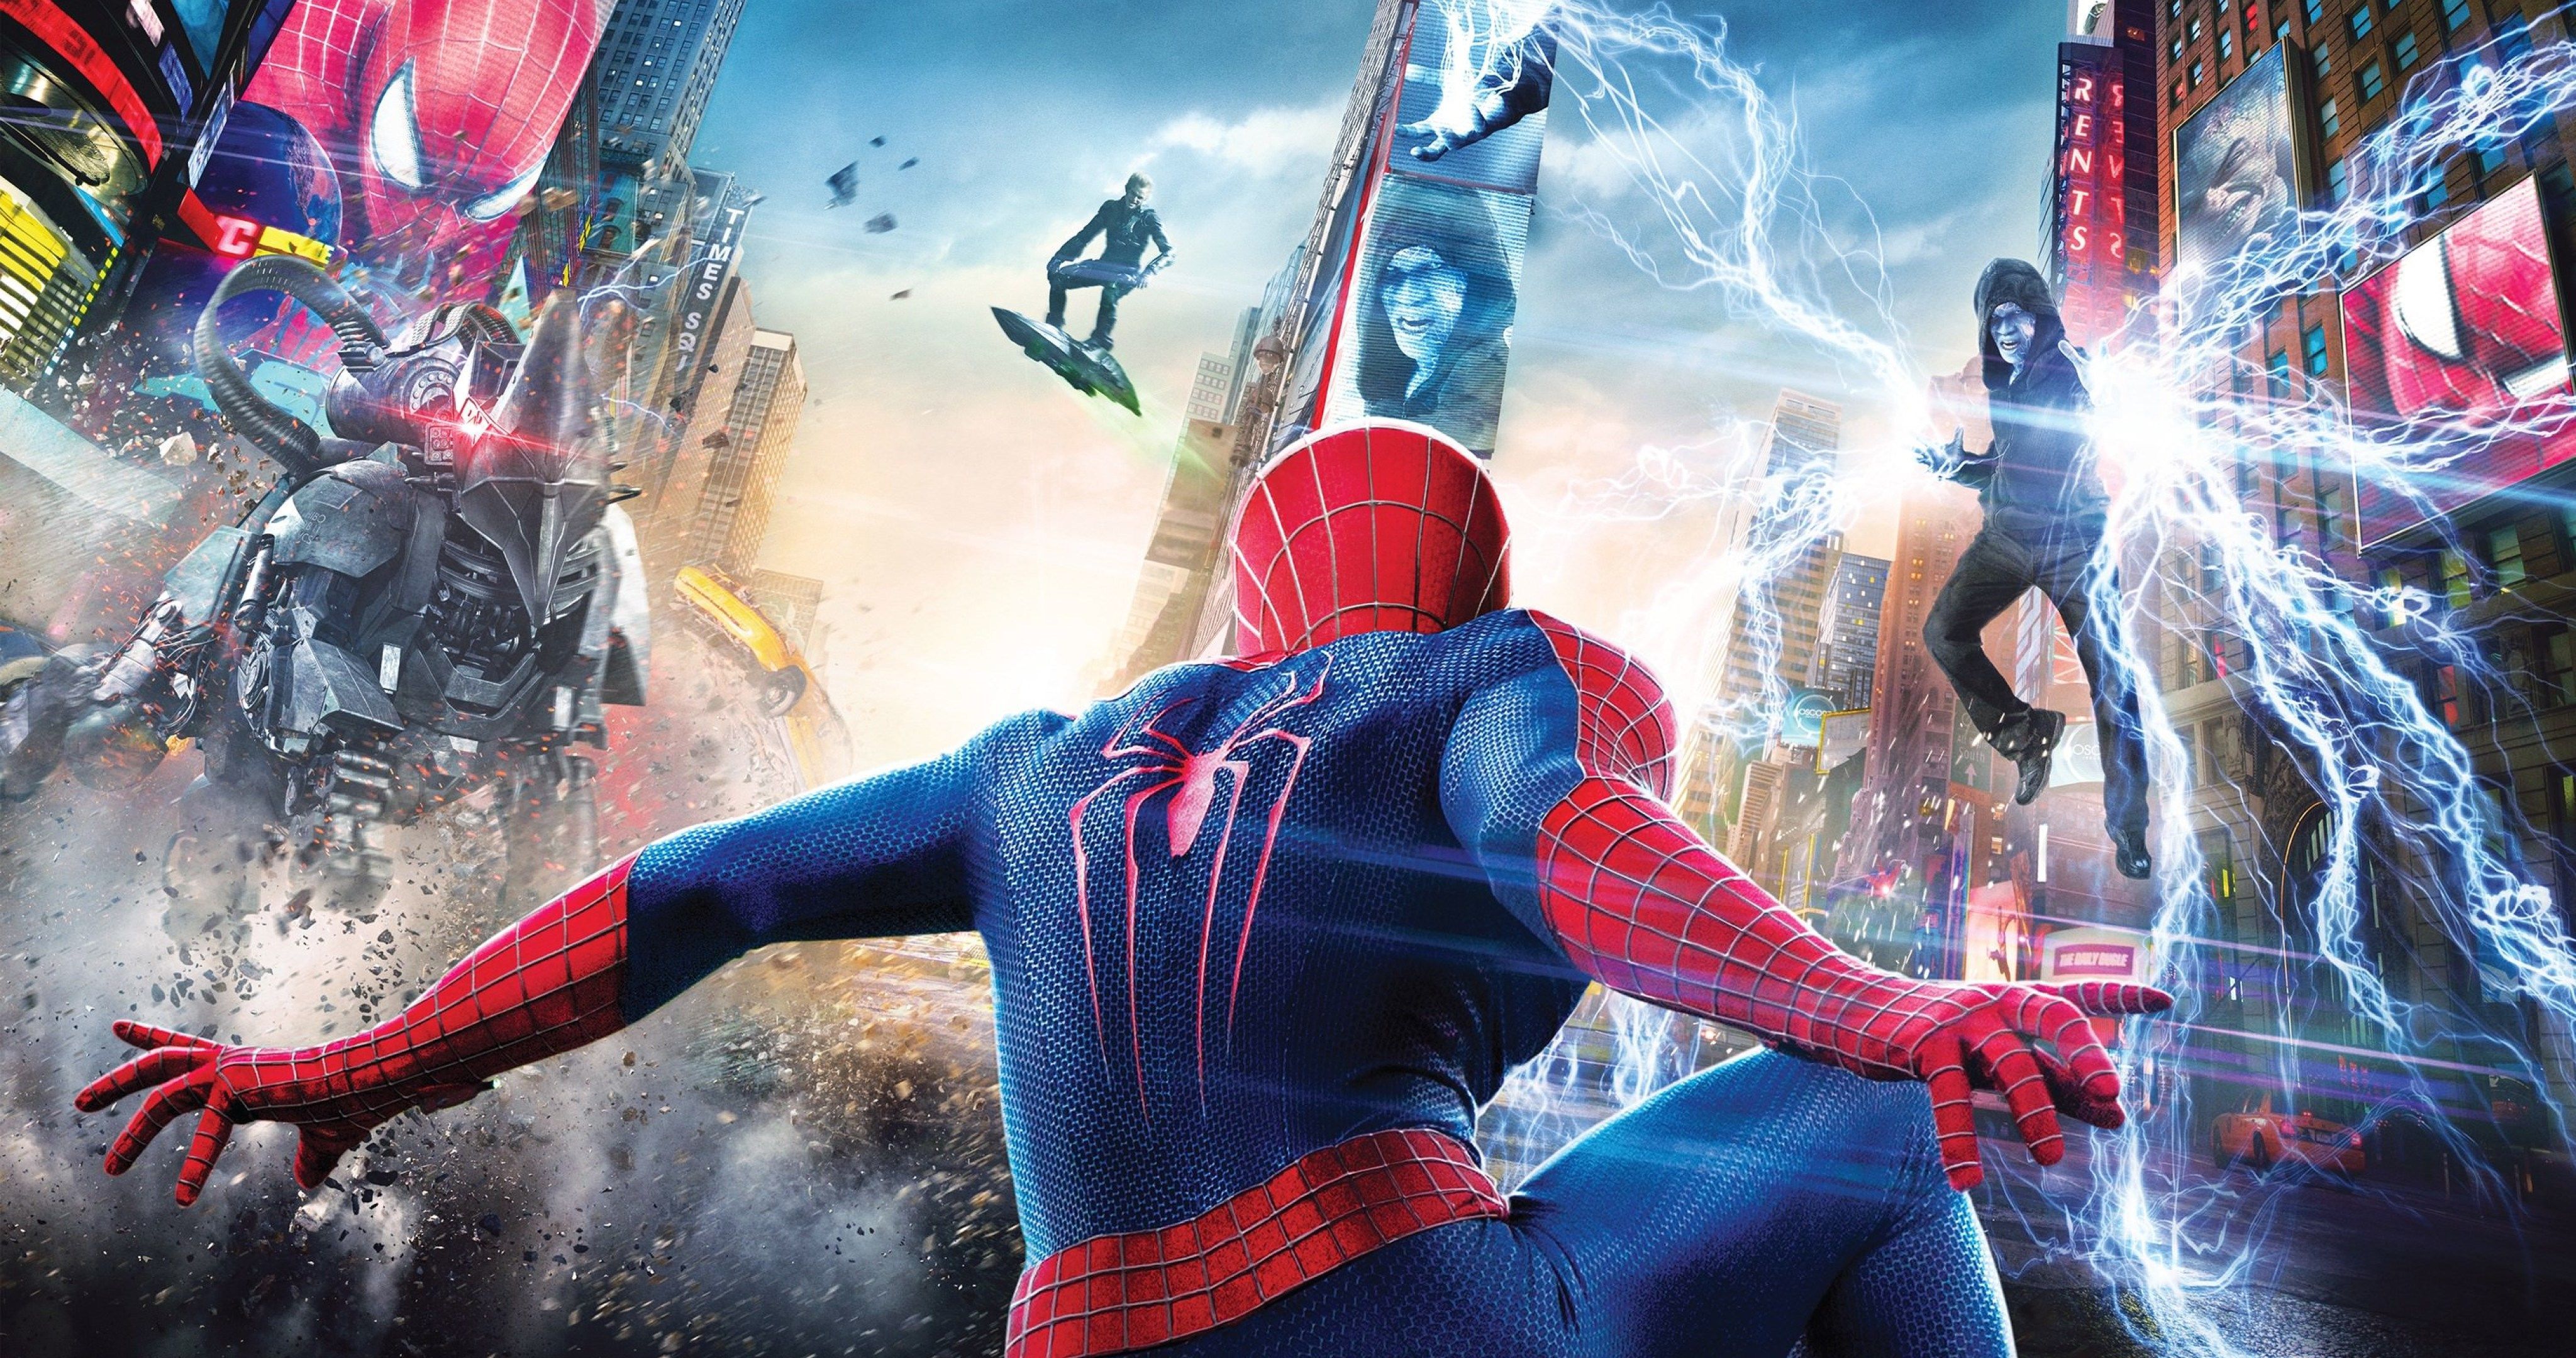 exclusive the amazing spider man 2 4k ultra HD wallpaper. Spiderman, Amazing spiderman, The amazing spiderman 2